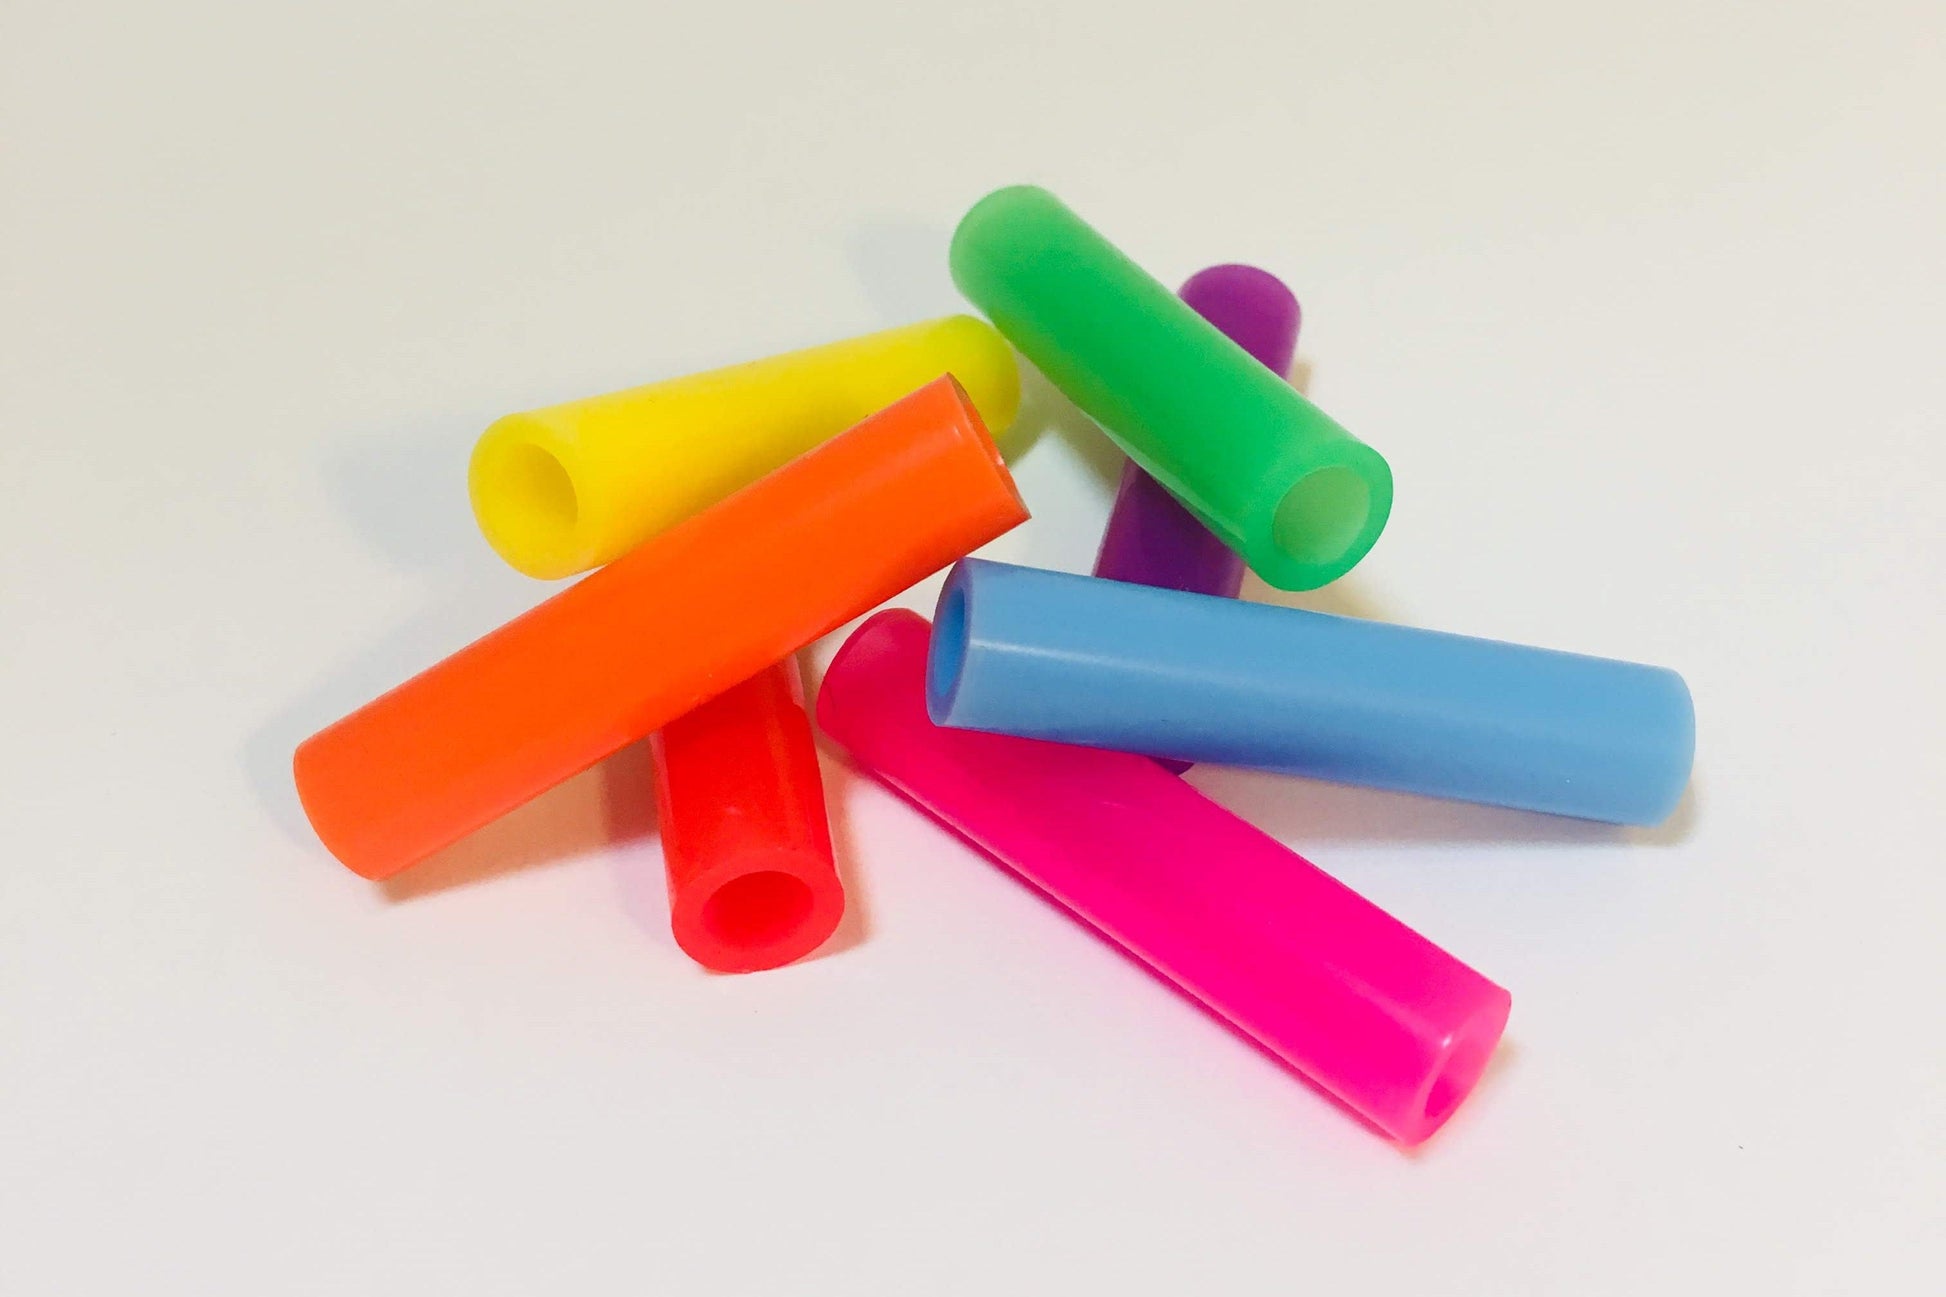 Food Grade Silicone Straw Tips - Reusable Covers For Stainless